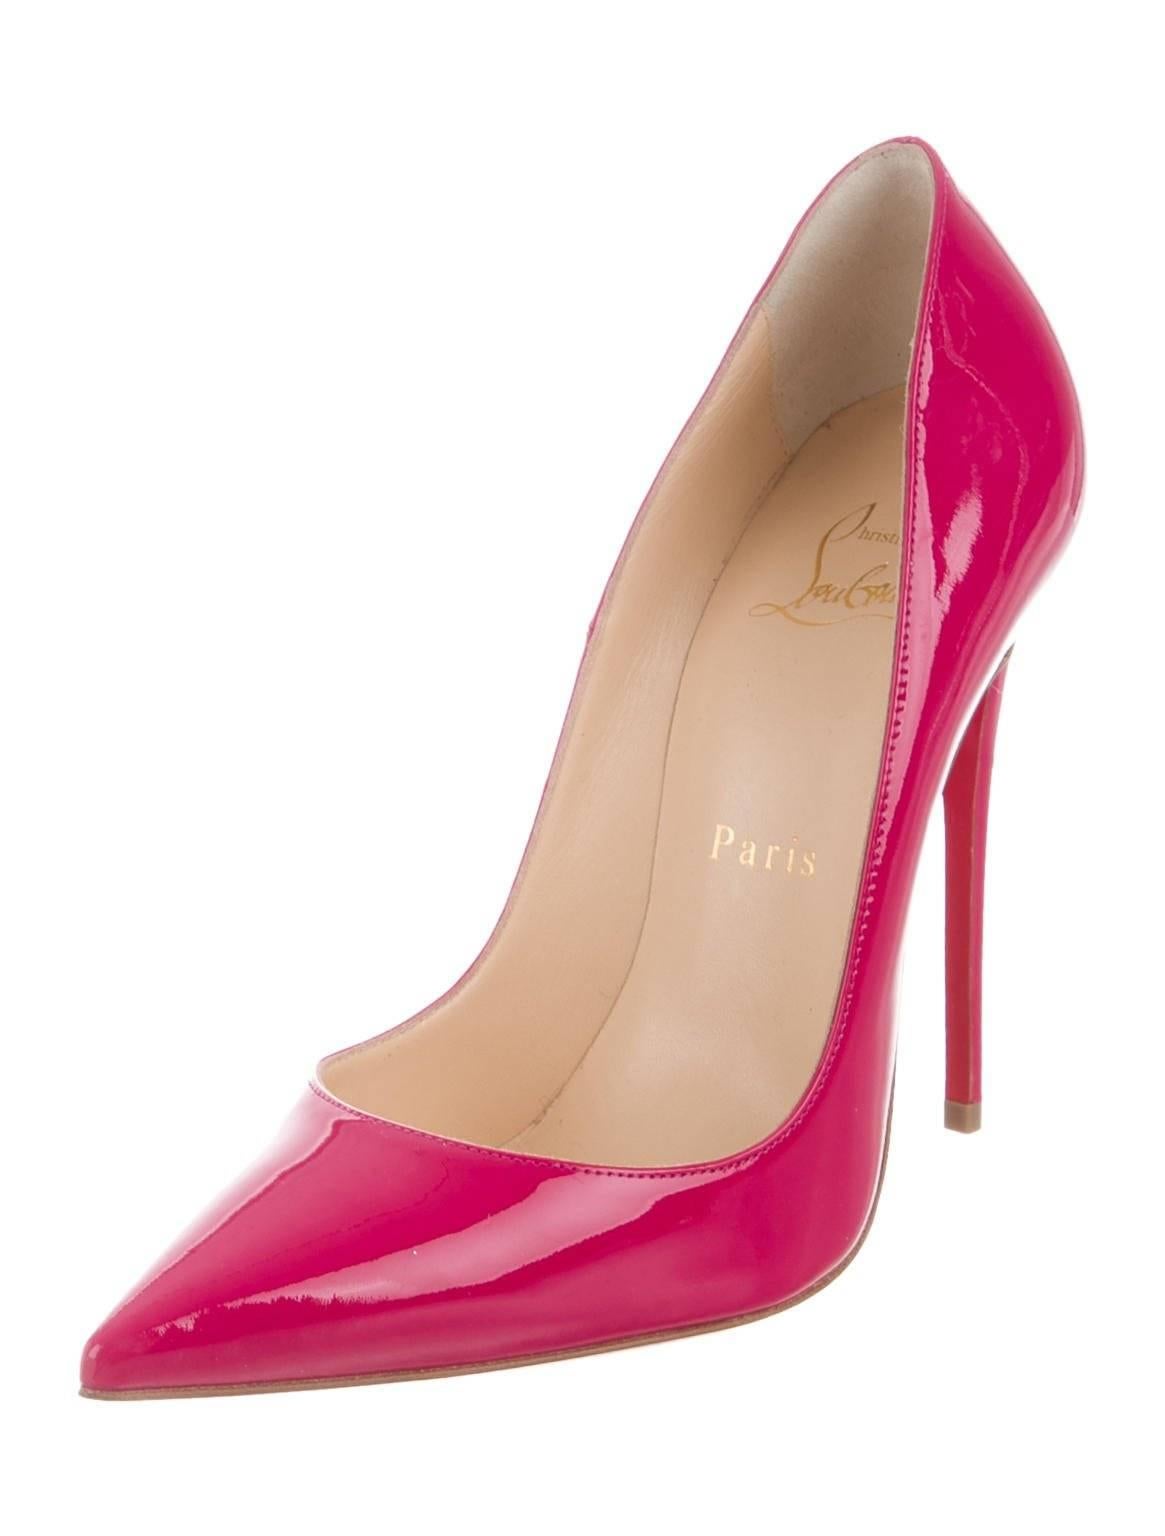 Christian Louboutin New Fuchsia Patent Leather Pigalle Evening High Heels Pumps in Box  

Size IT 36
Patent leather 
Slip on
Made in Italy
Heel height 4.5